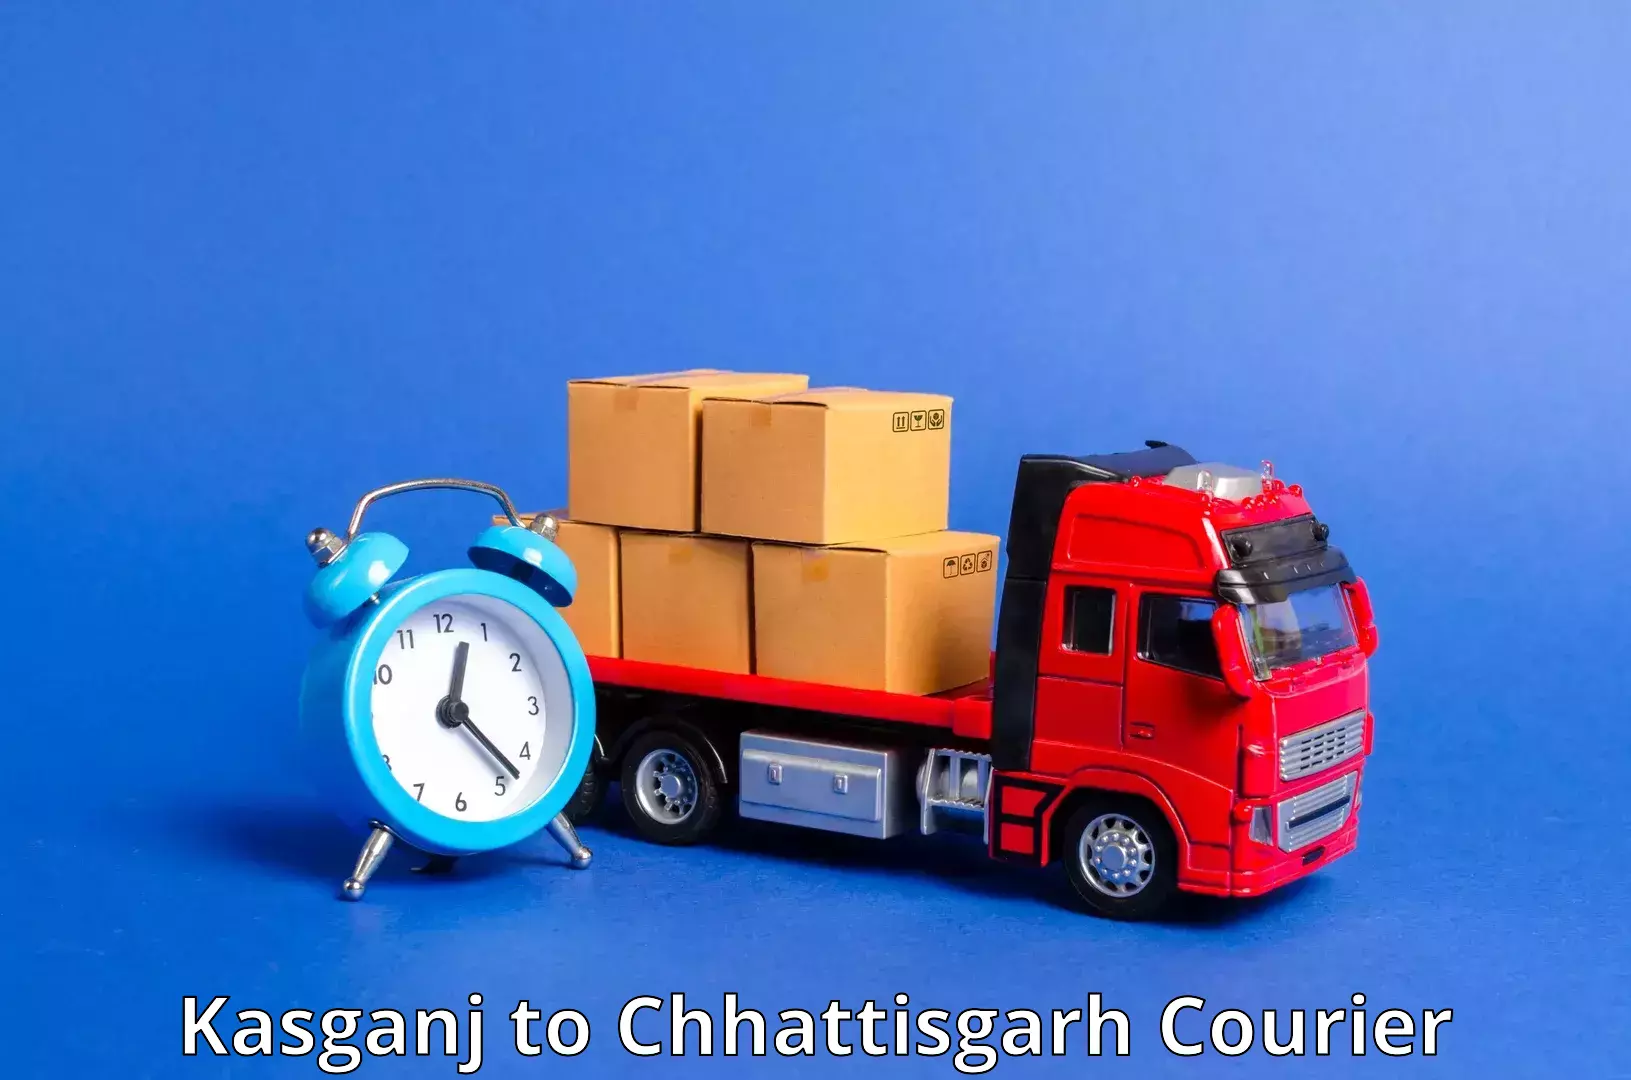 State-of-the-art courier technology Kasganj to Ratanpur